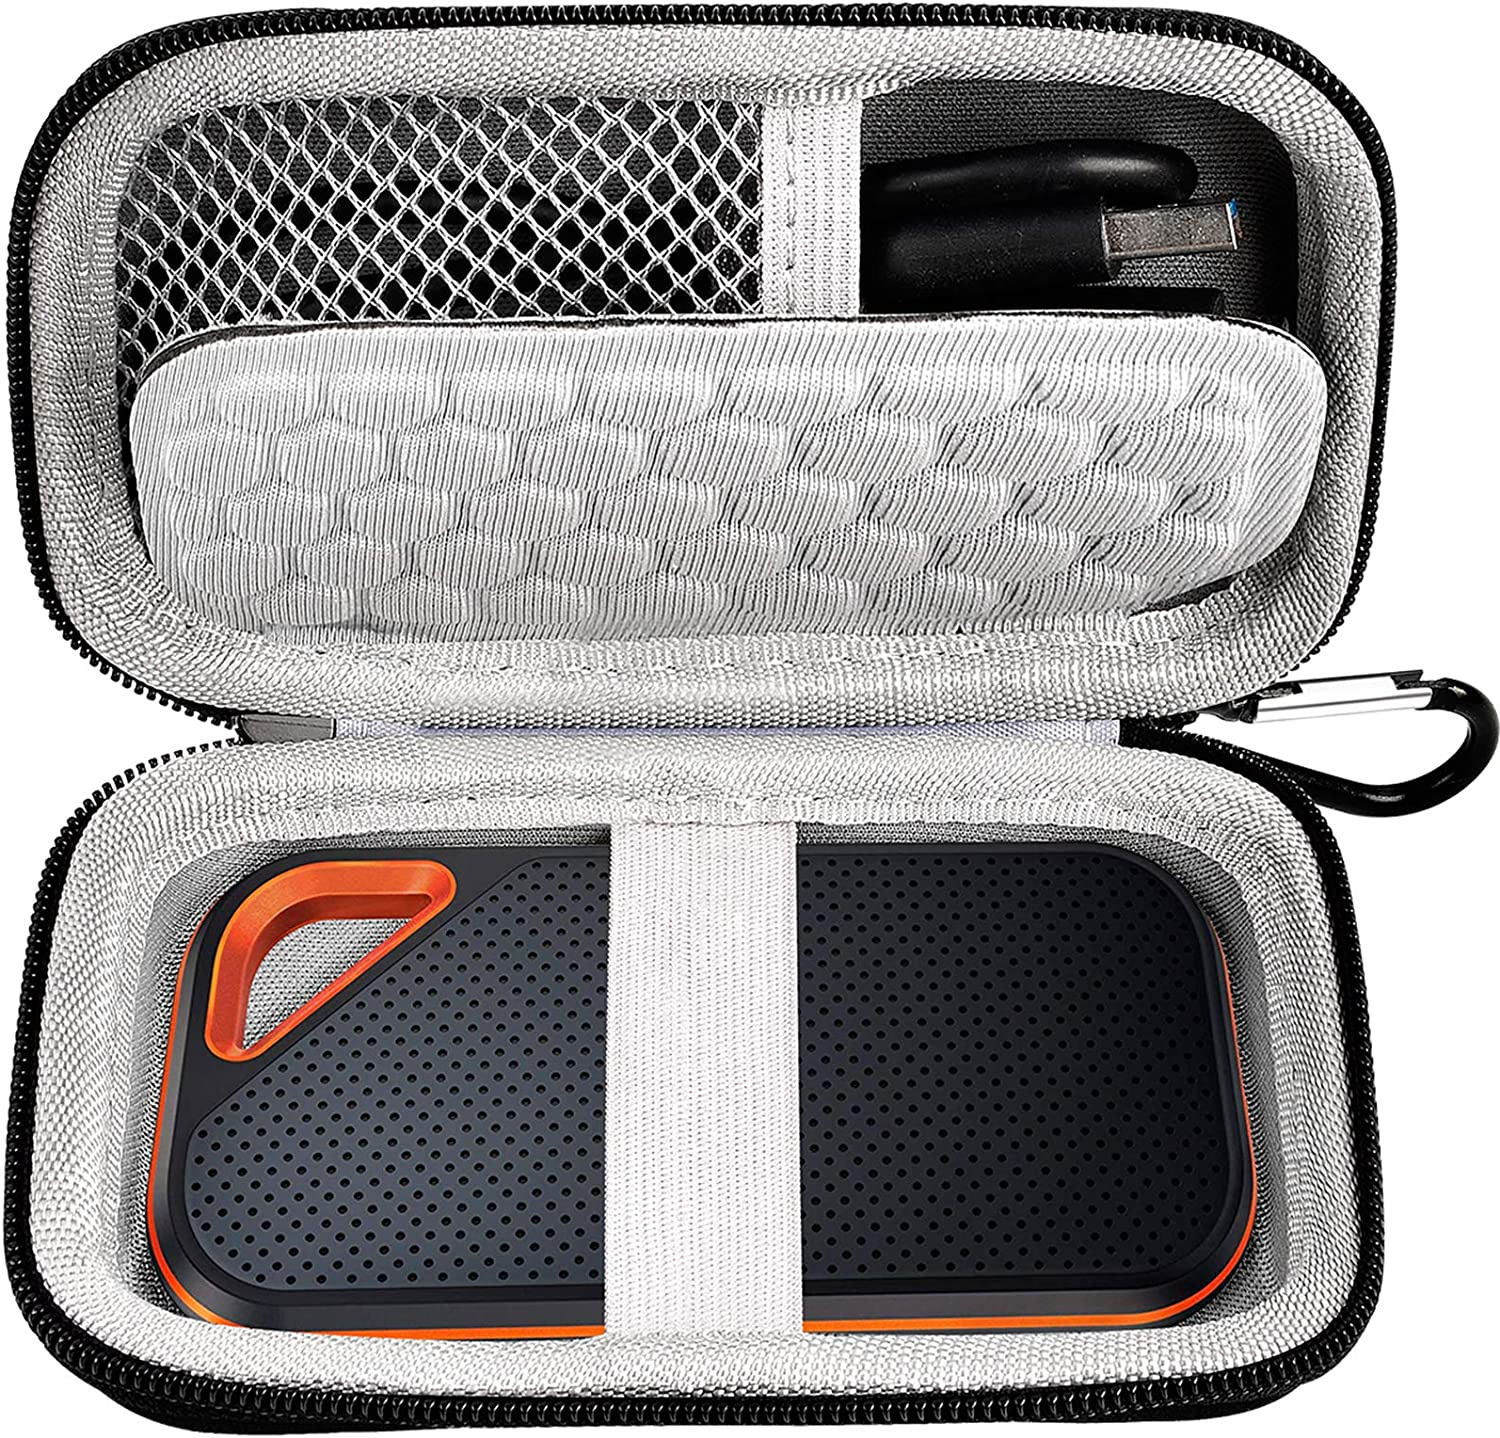 Hard Case Compatible with Sandisk Extreme Pro/For Sandisk 500GB 1TB 2TB 4TB Port